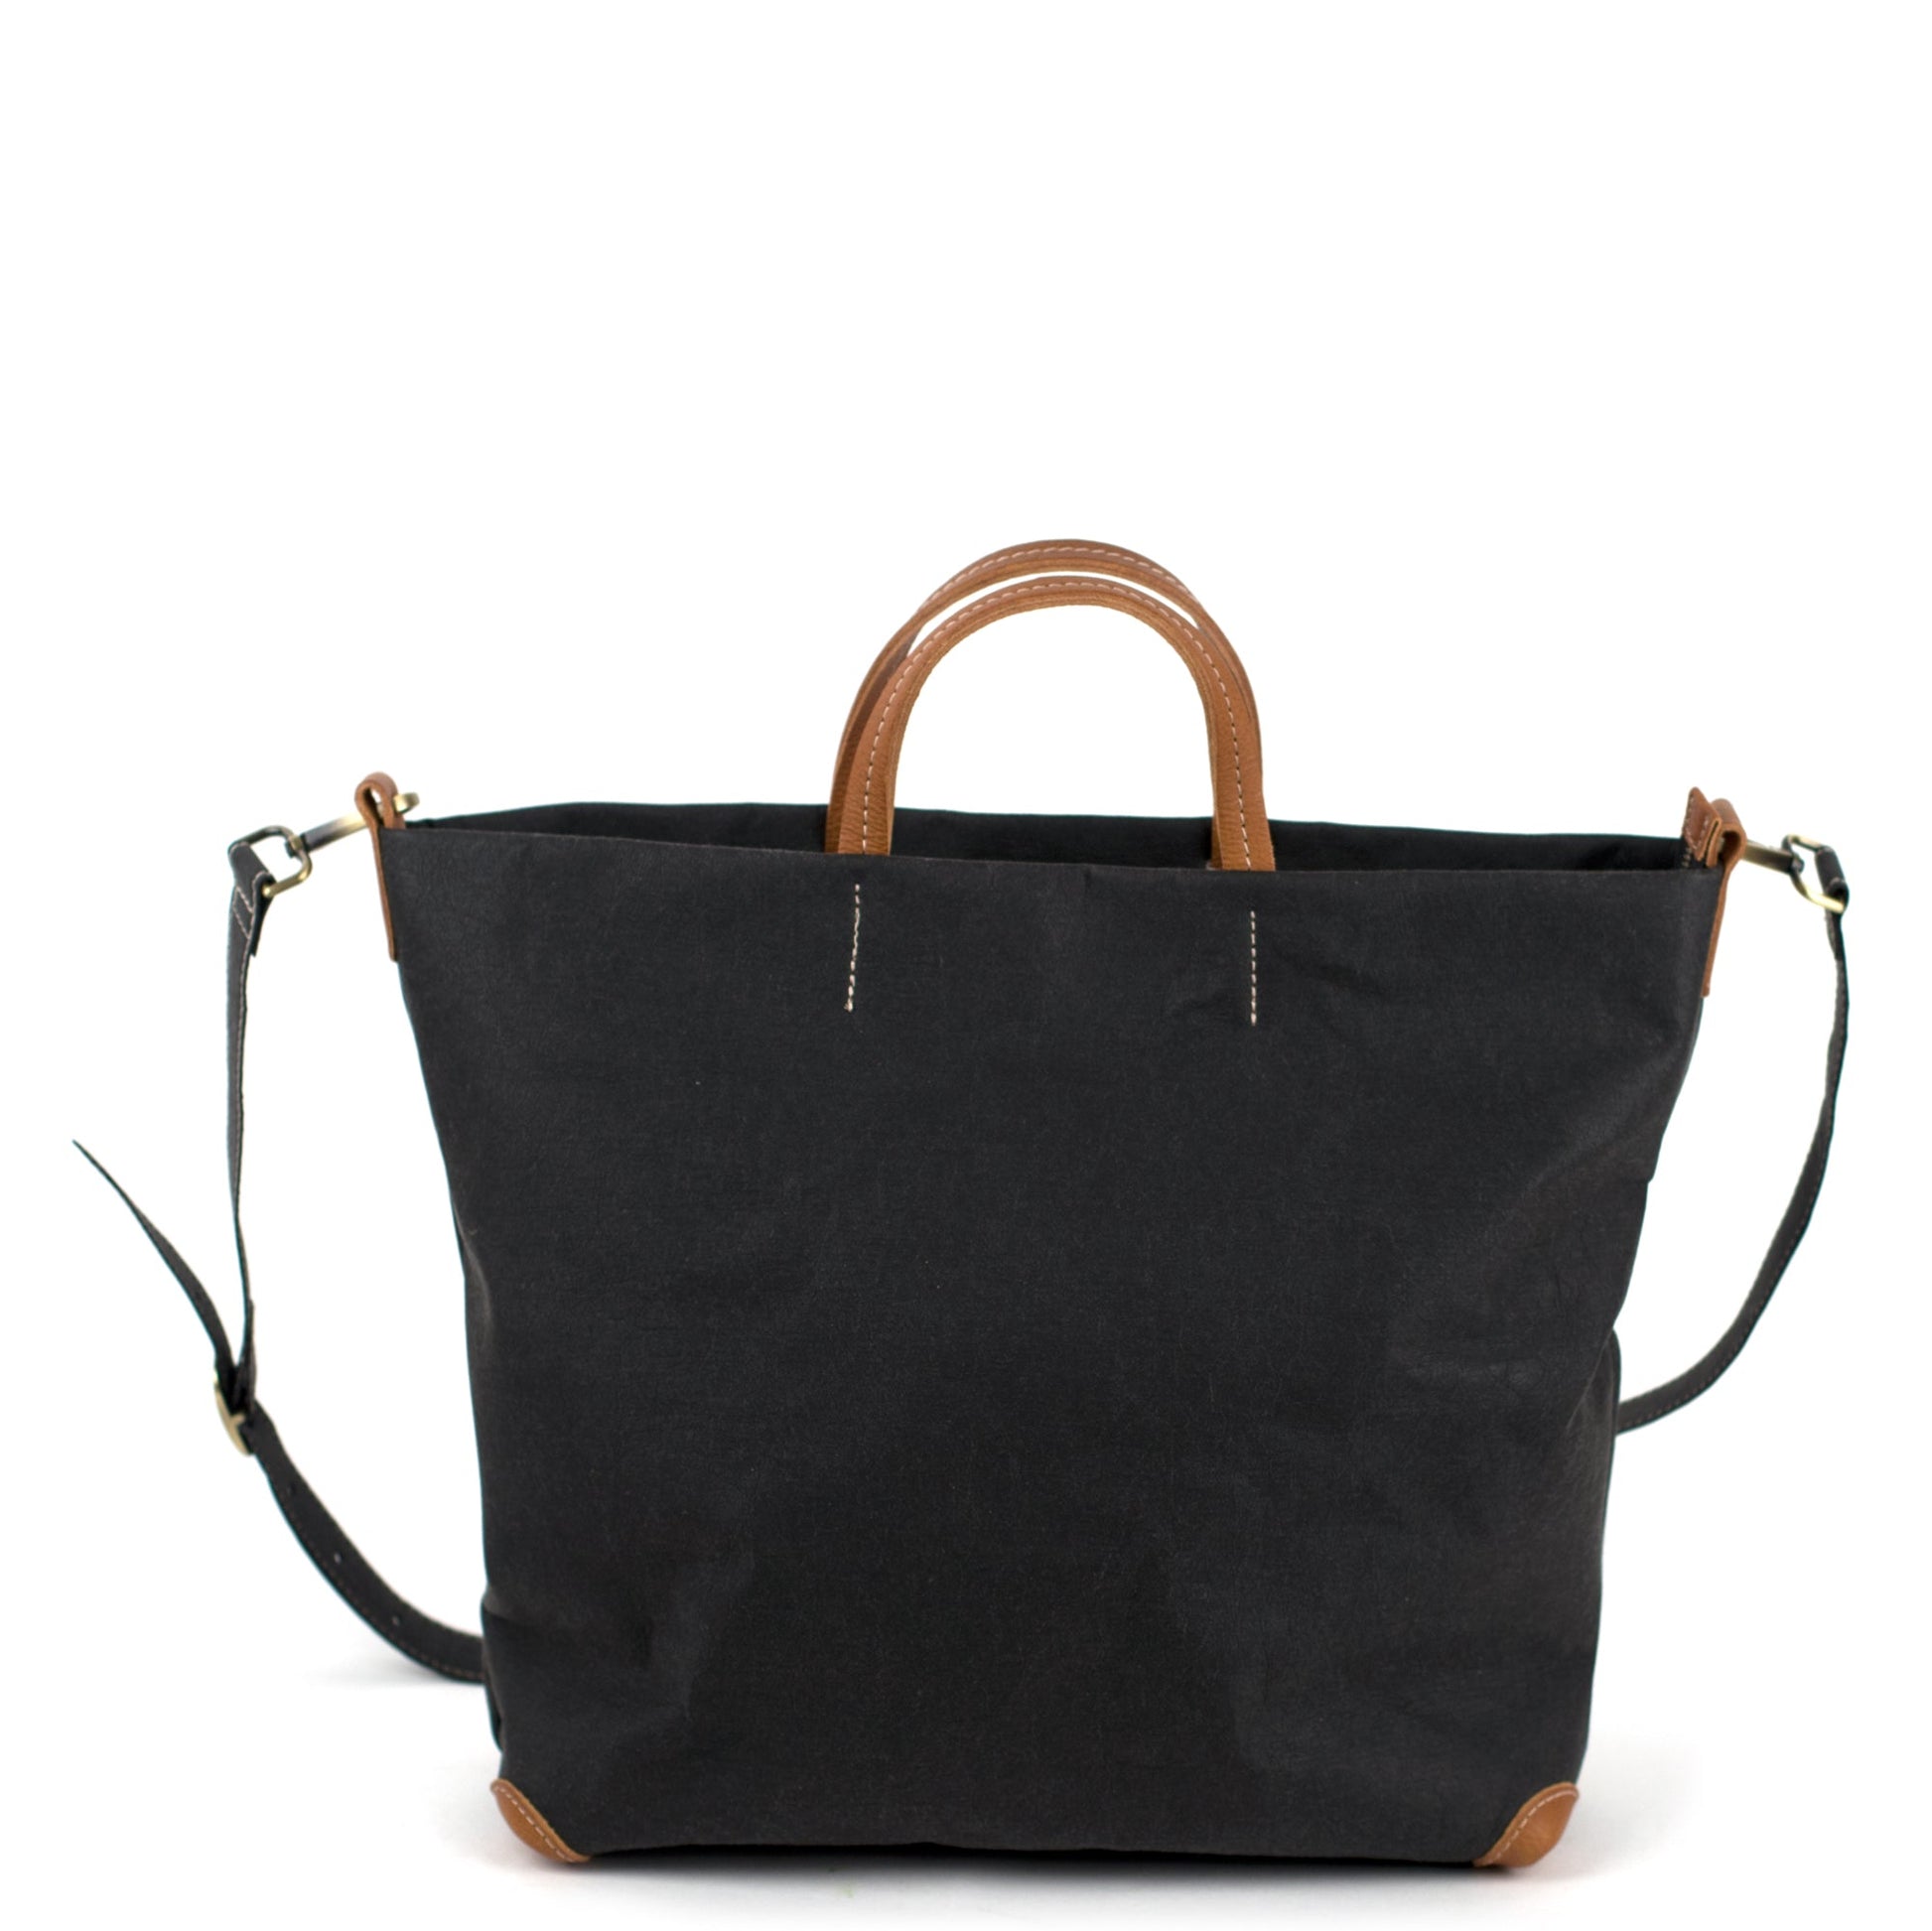 A square black washable paper tote bag is shown with one long black shoulder strap and two small tan handles. The corners of the bag are protected by brown corners.